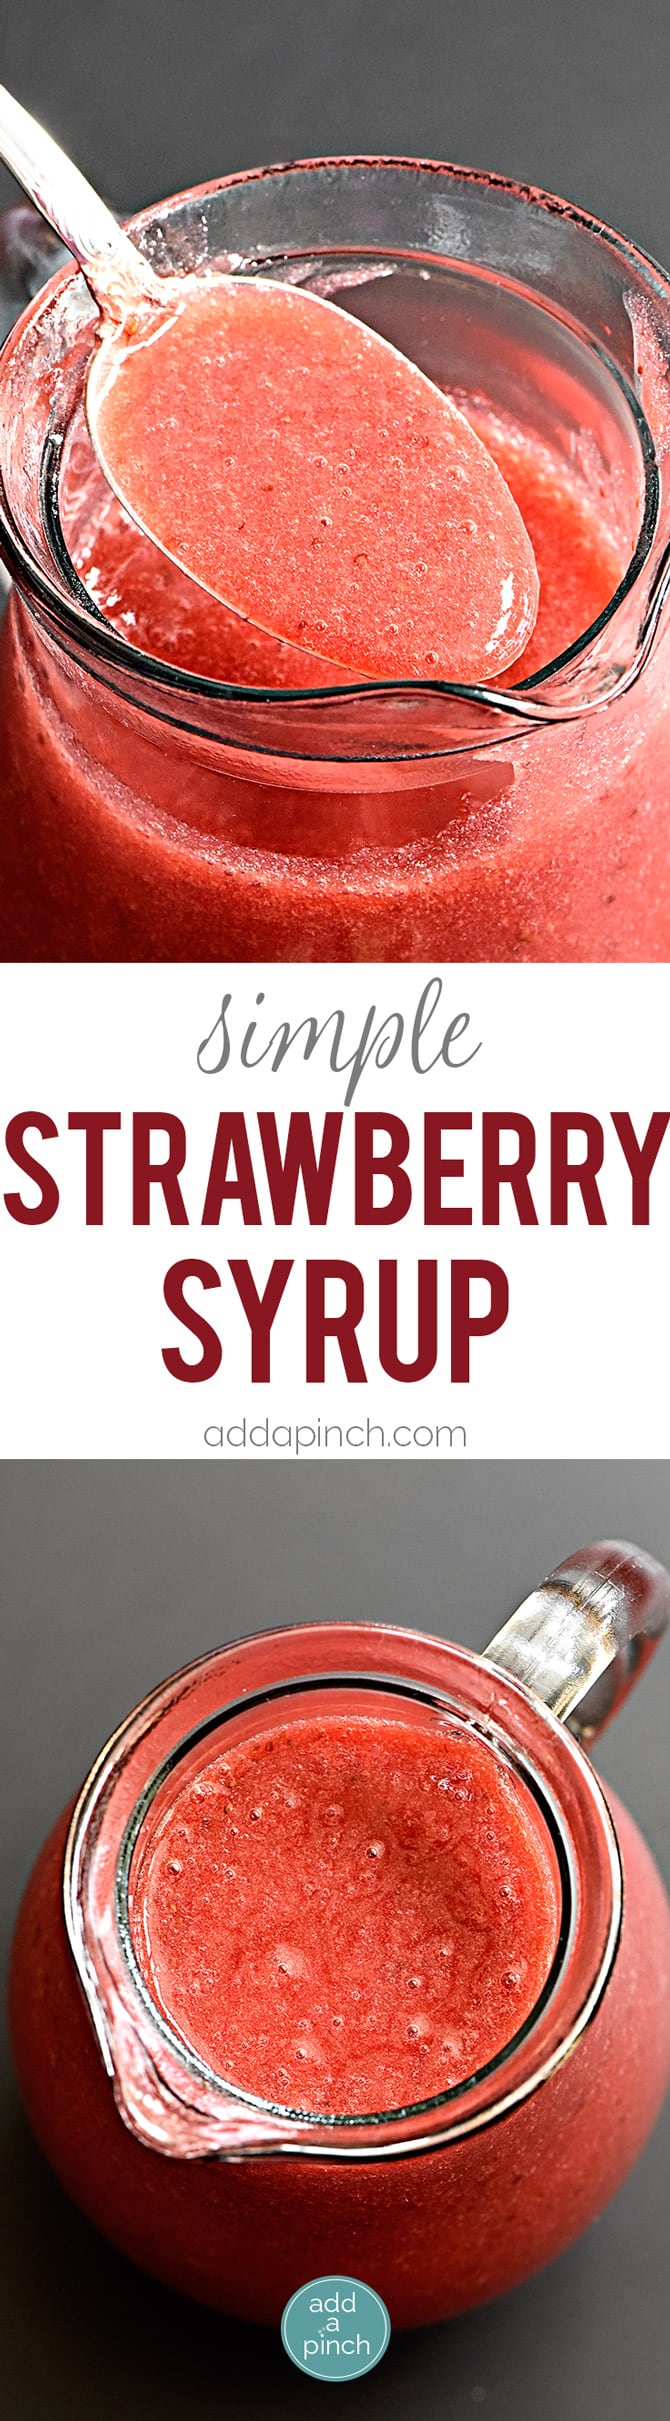 Simple strawberry syrup recipe uses just 3 ingredients! Ready in minutes, this strawberry syrup is perfect for so many dishes! // addapinch.com